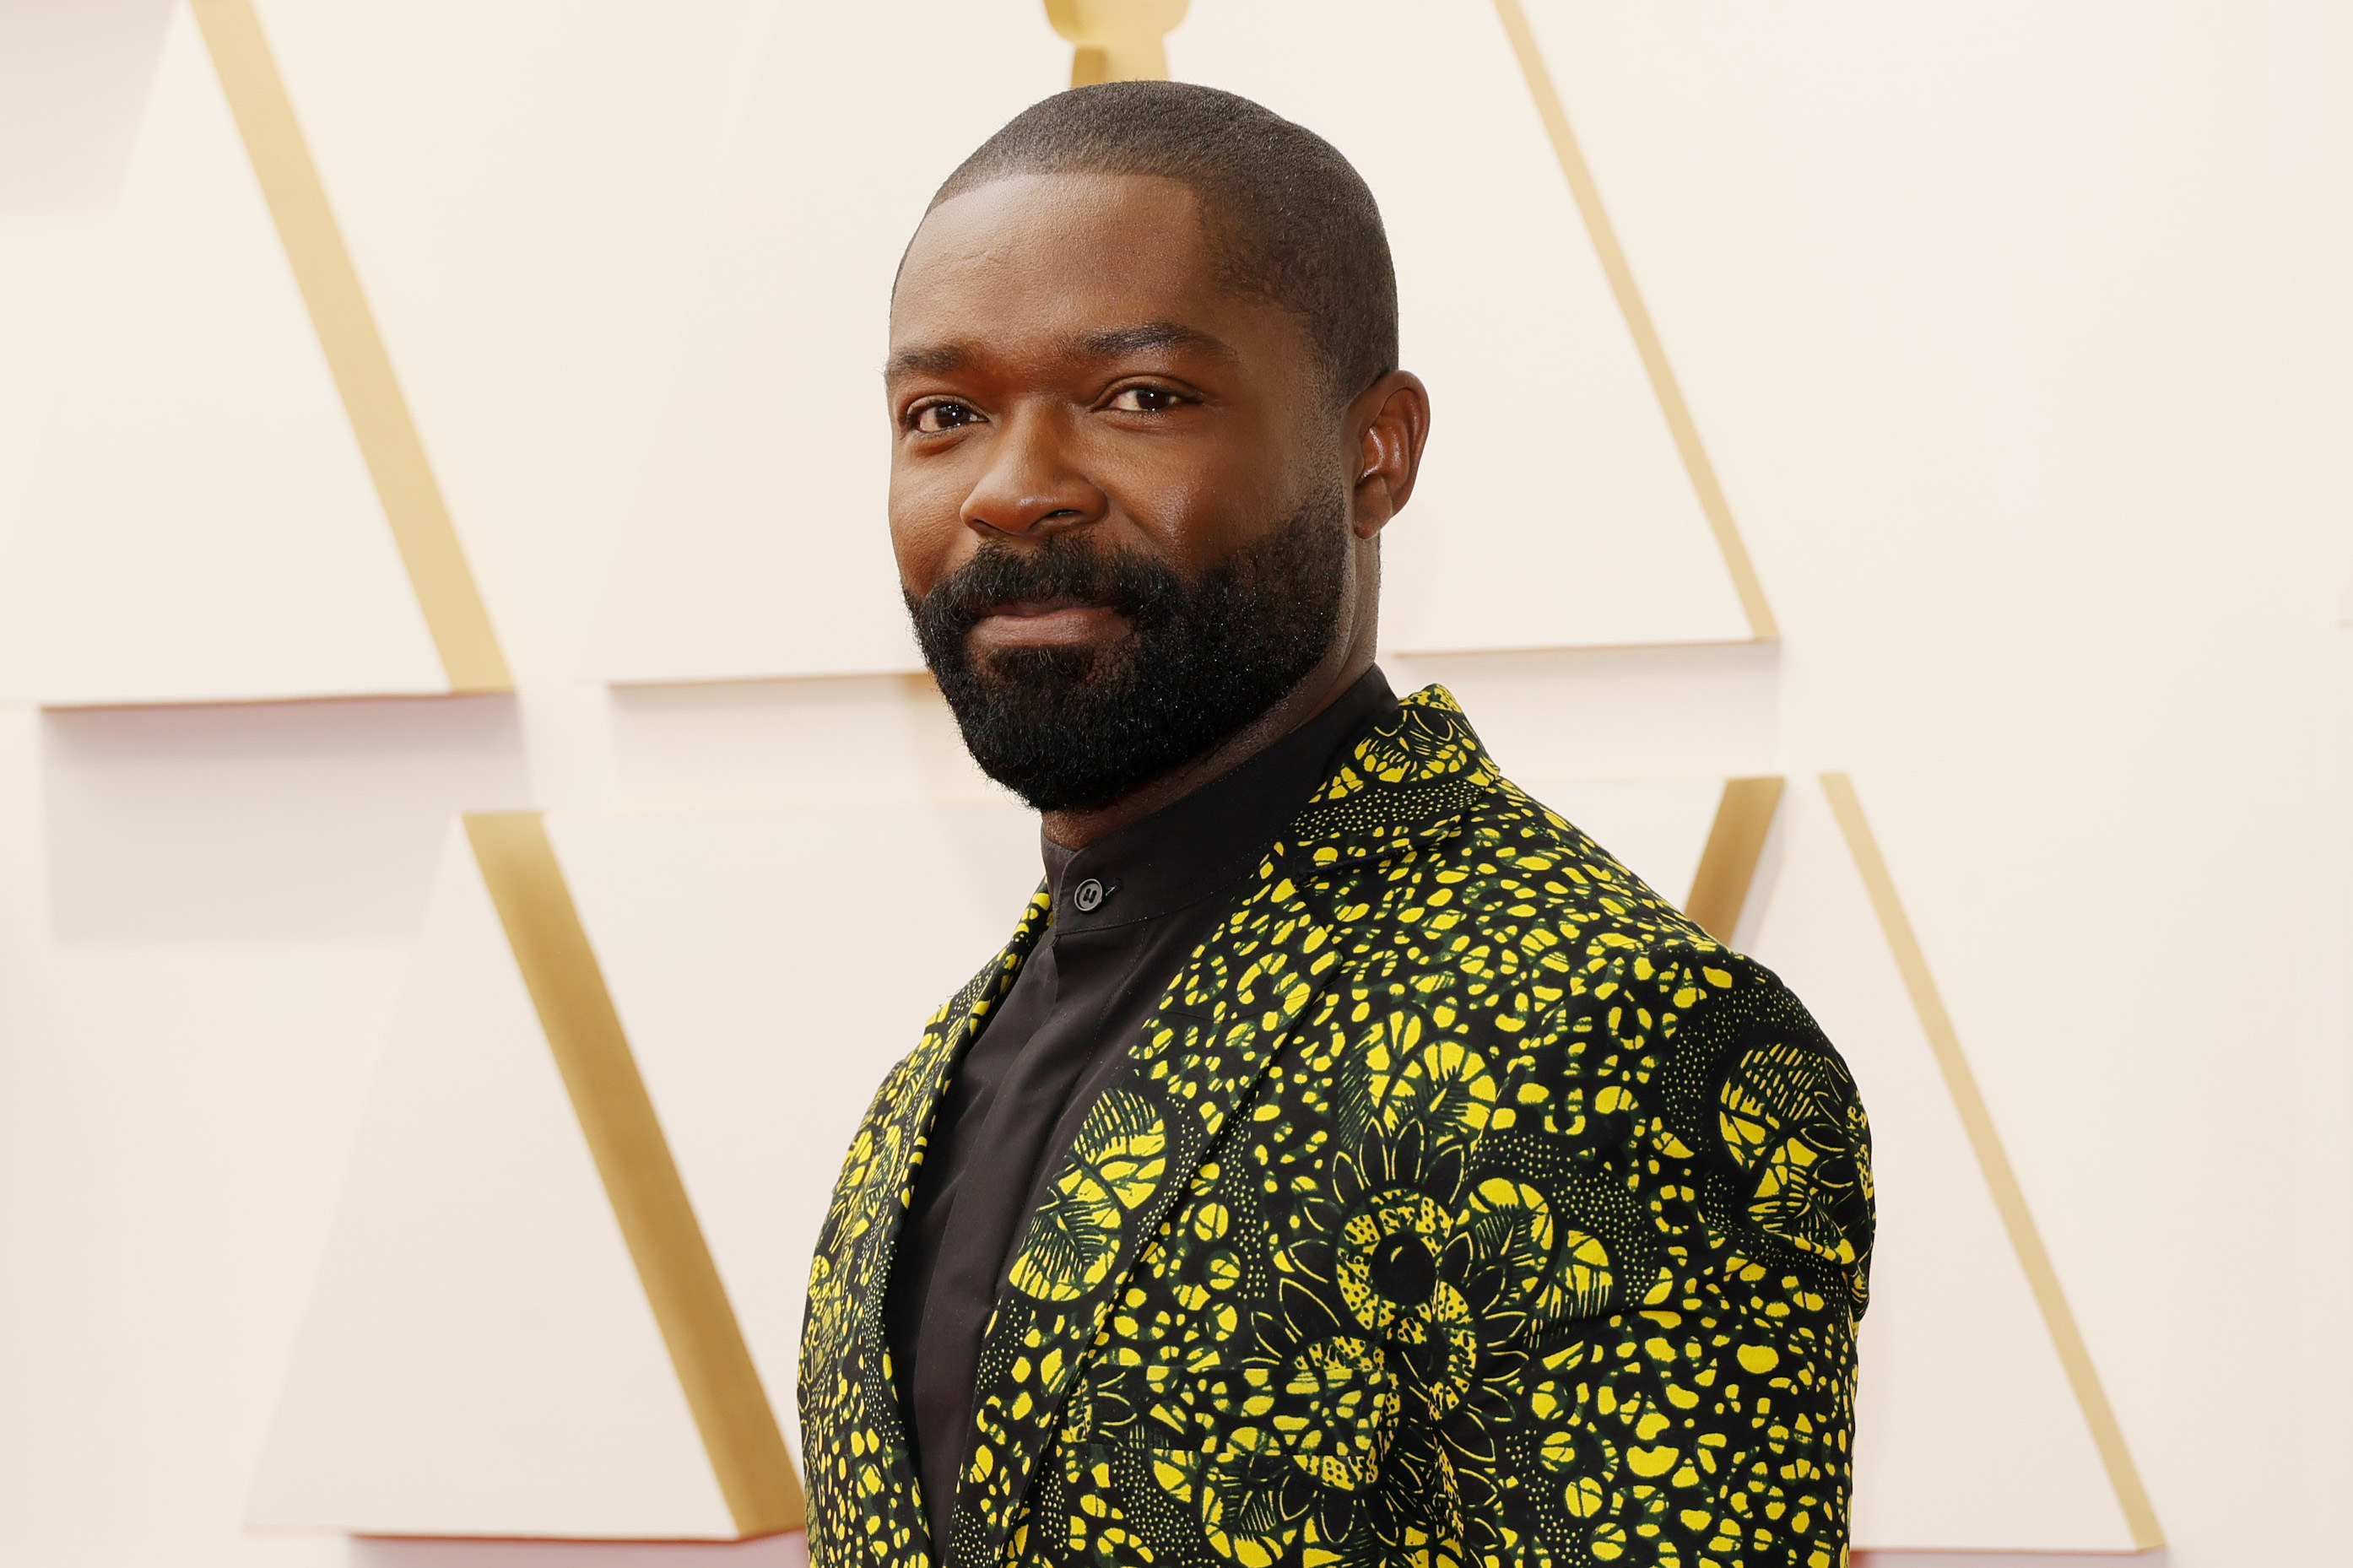 David Oyelowo is seen at the Oscars on March 27, 2022